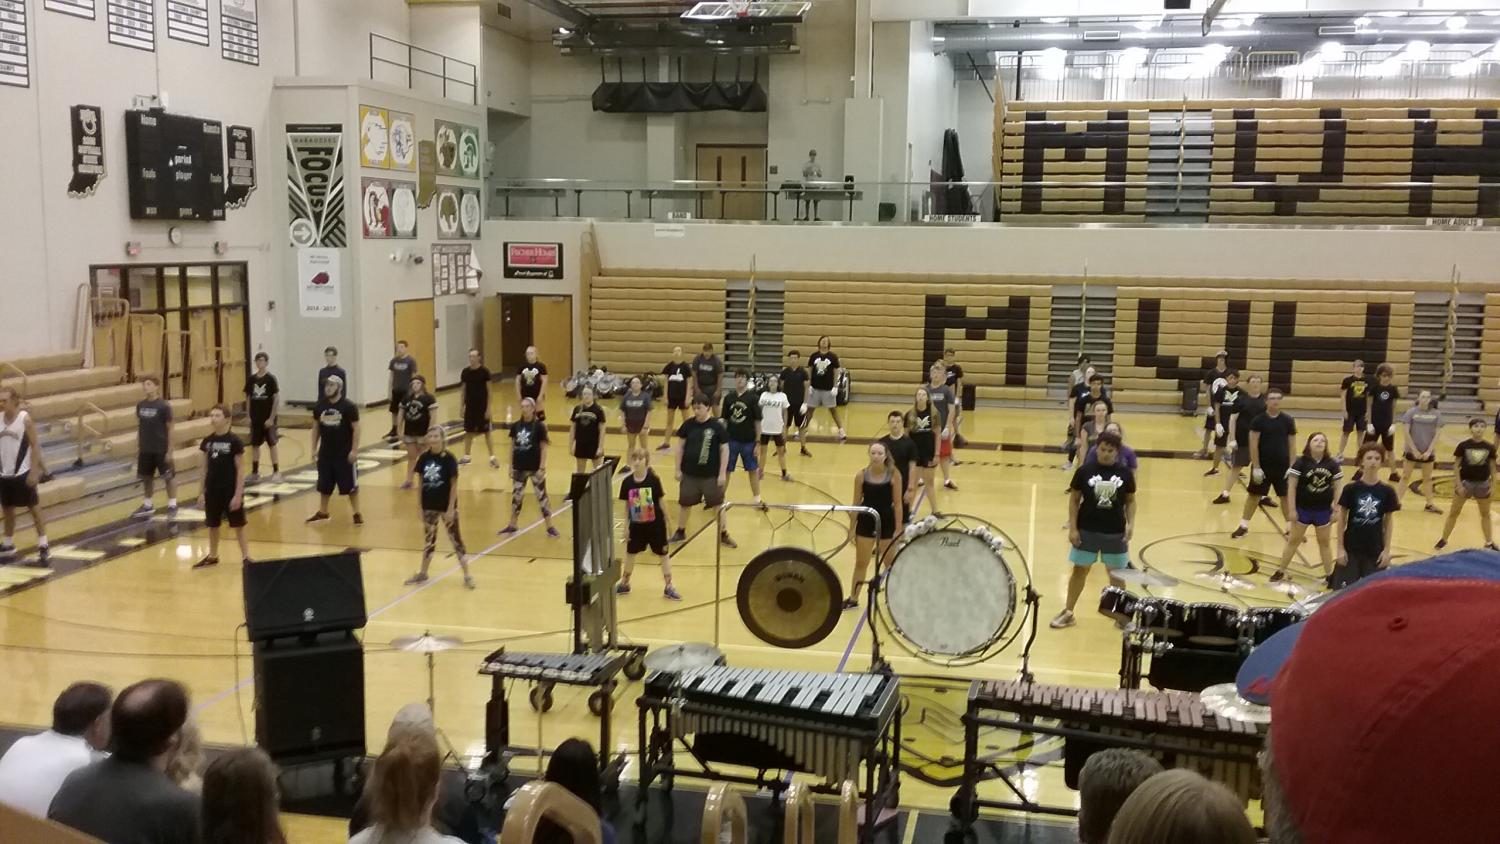 The marching band practicing in the gym